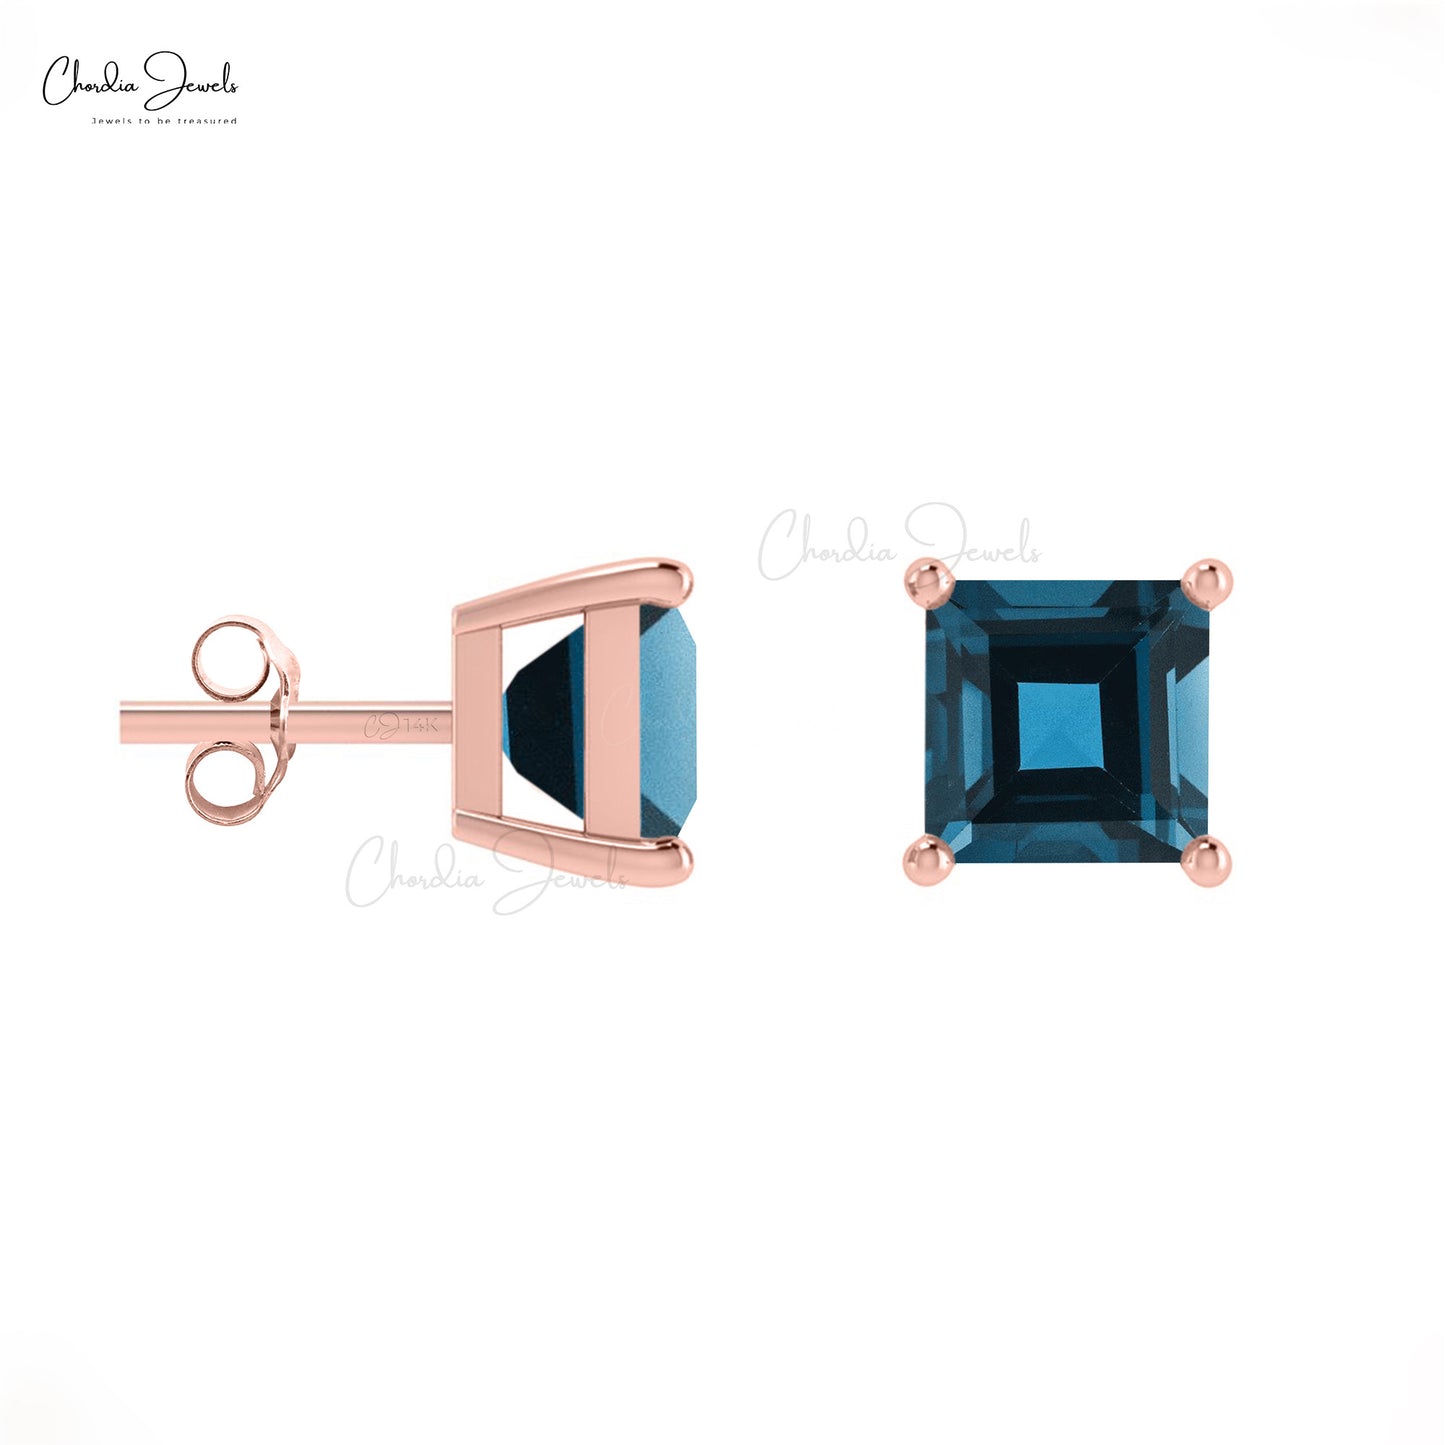 AAA Quality 4mm Square Cut Natural London Blue Topaz Studs 14k Solid Gold December Birthstone Gemstone Stud Earrings Hallmarked Jewelry For Women